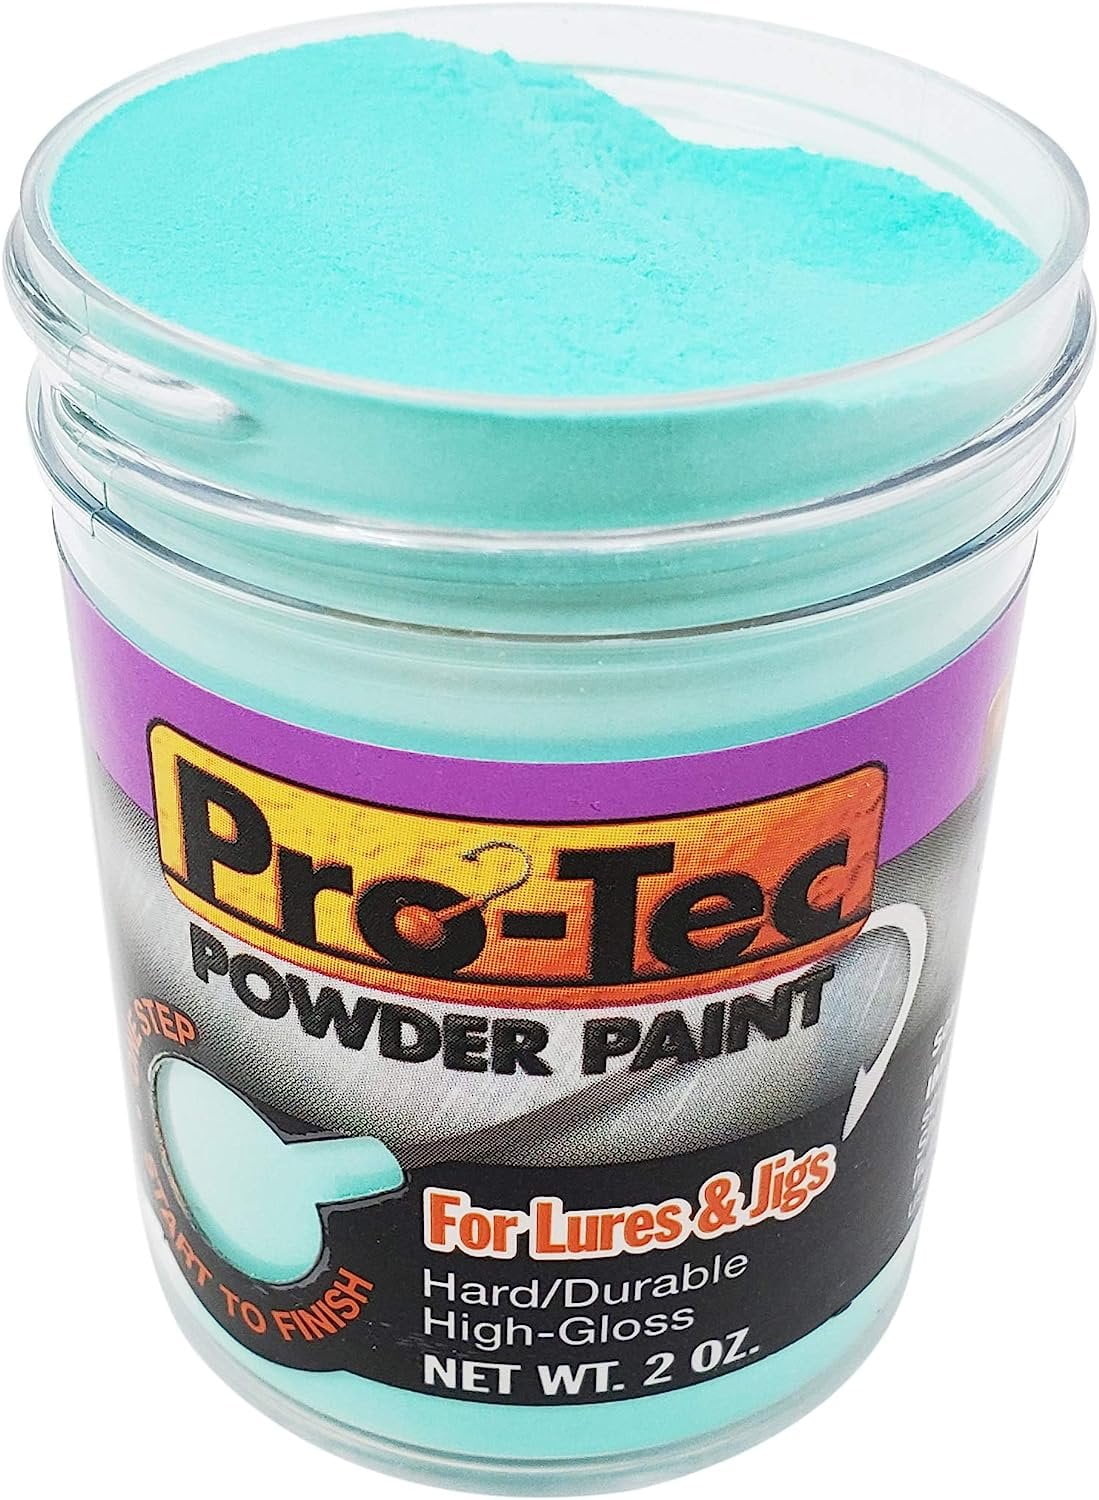 Powder Paint For Jig Heads – Easy Kasting